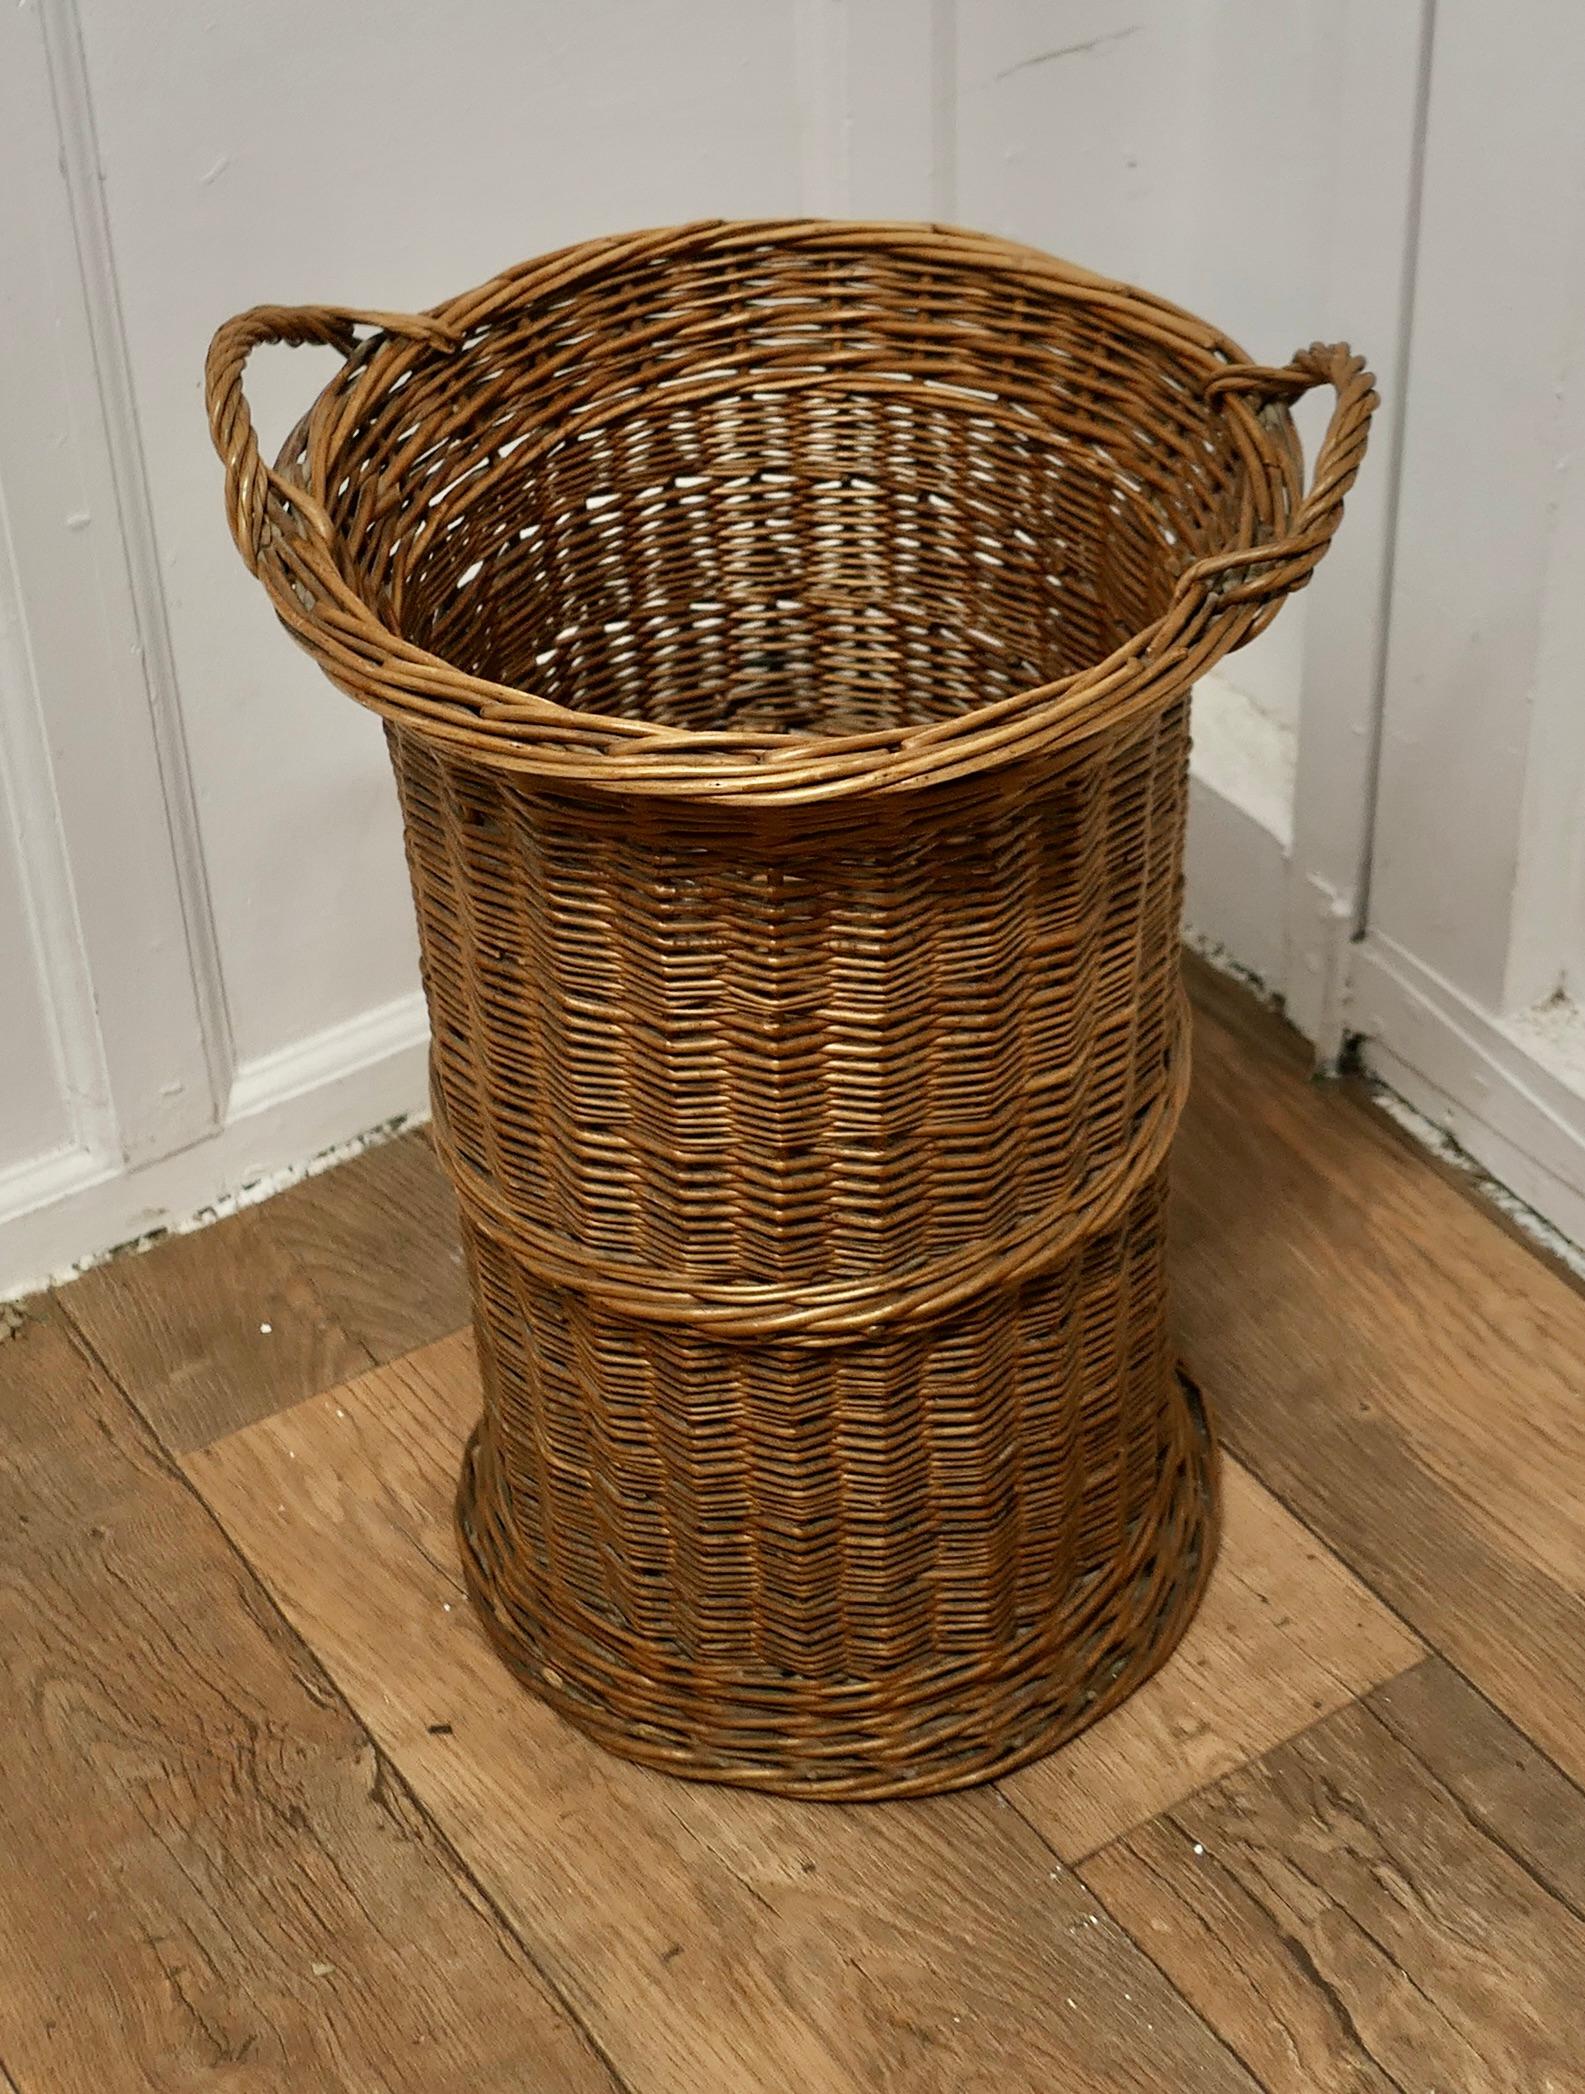 Tall French Antique Wicker Bread Basket

This is an excellent example and in remarkably good condition for its age, the basket is round, tall originally used in a bakery to transport French Bread. The basket has strong carrying handles and is woven